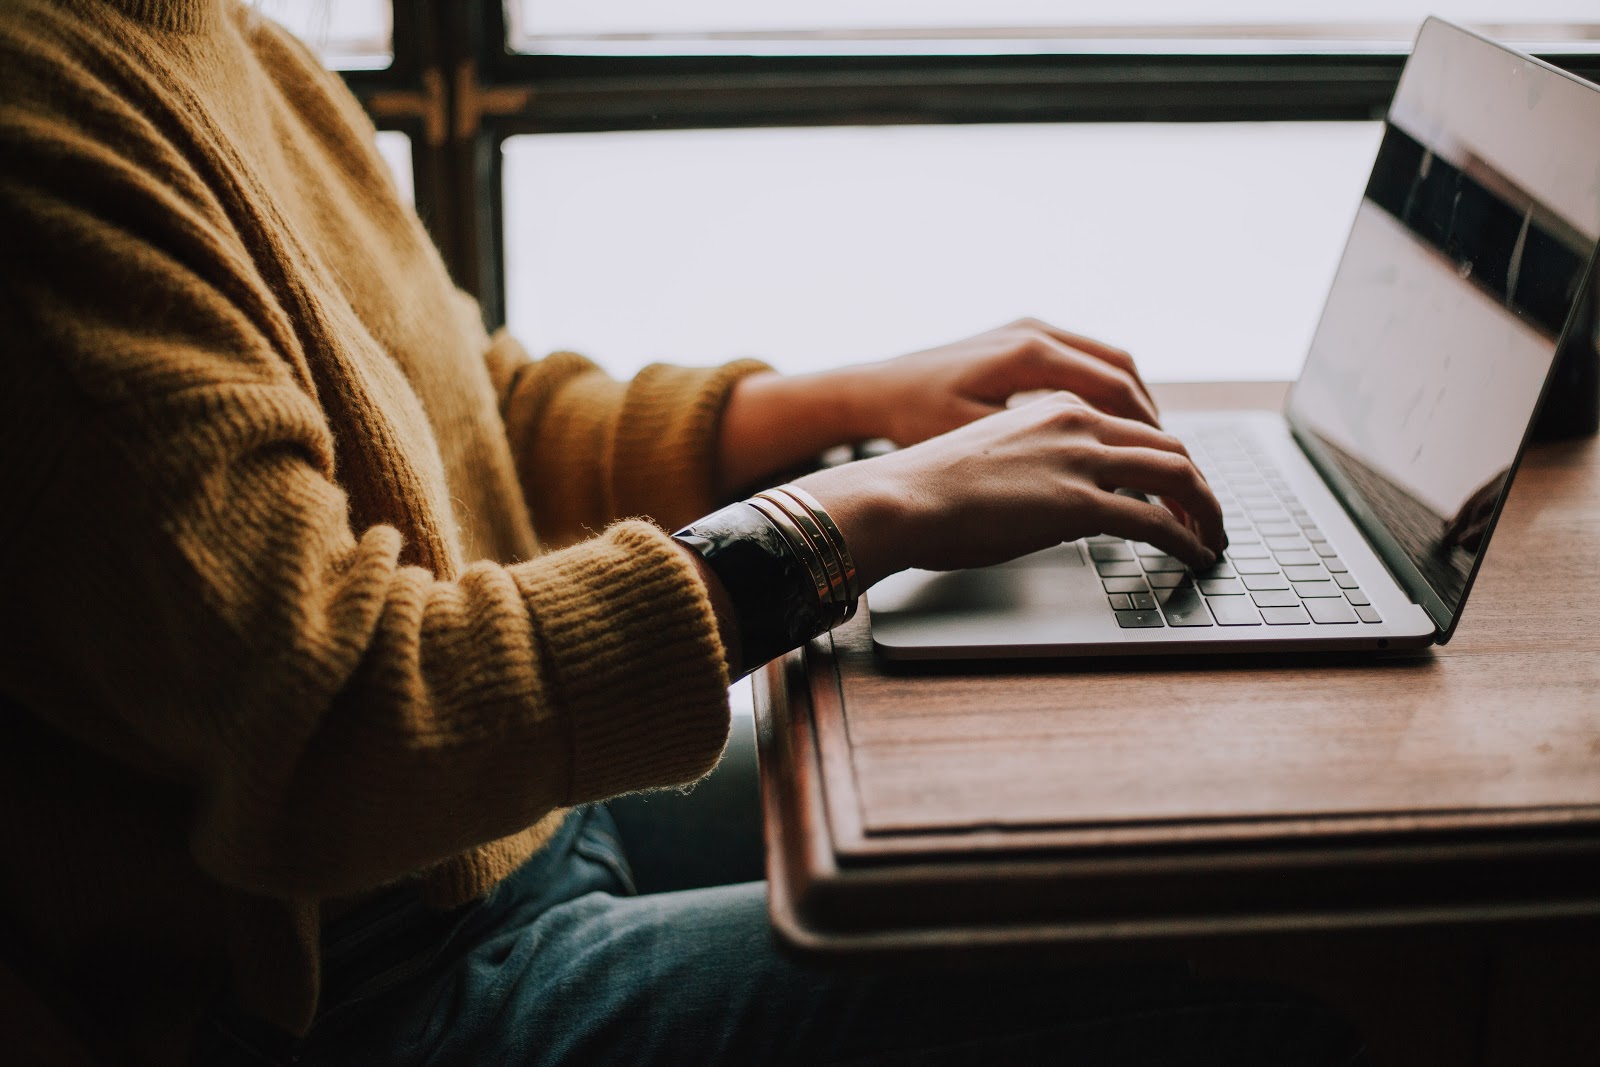 a person with a mustard jumper sits and types on a laptop